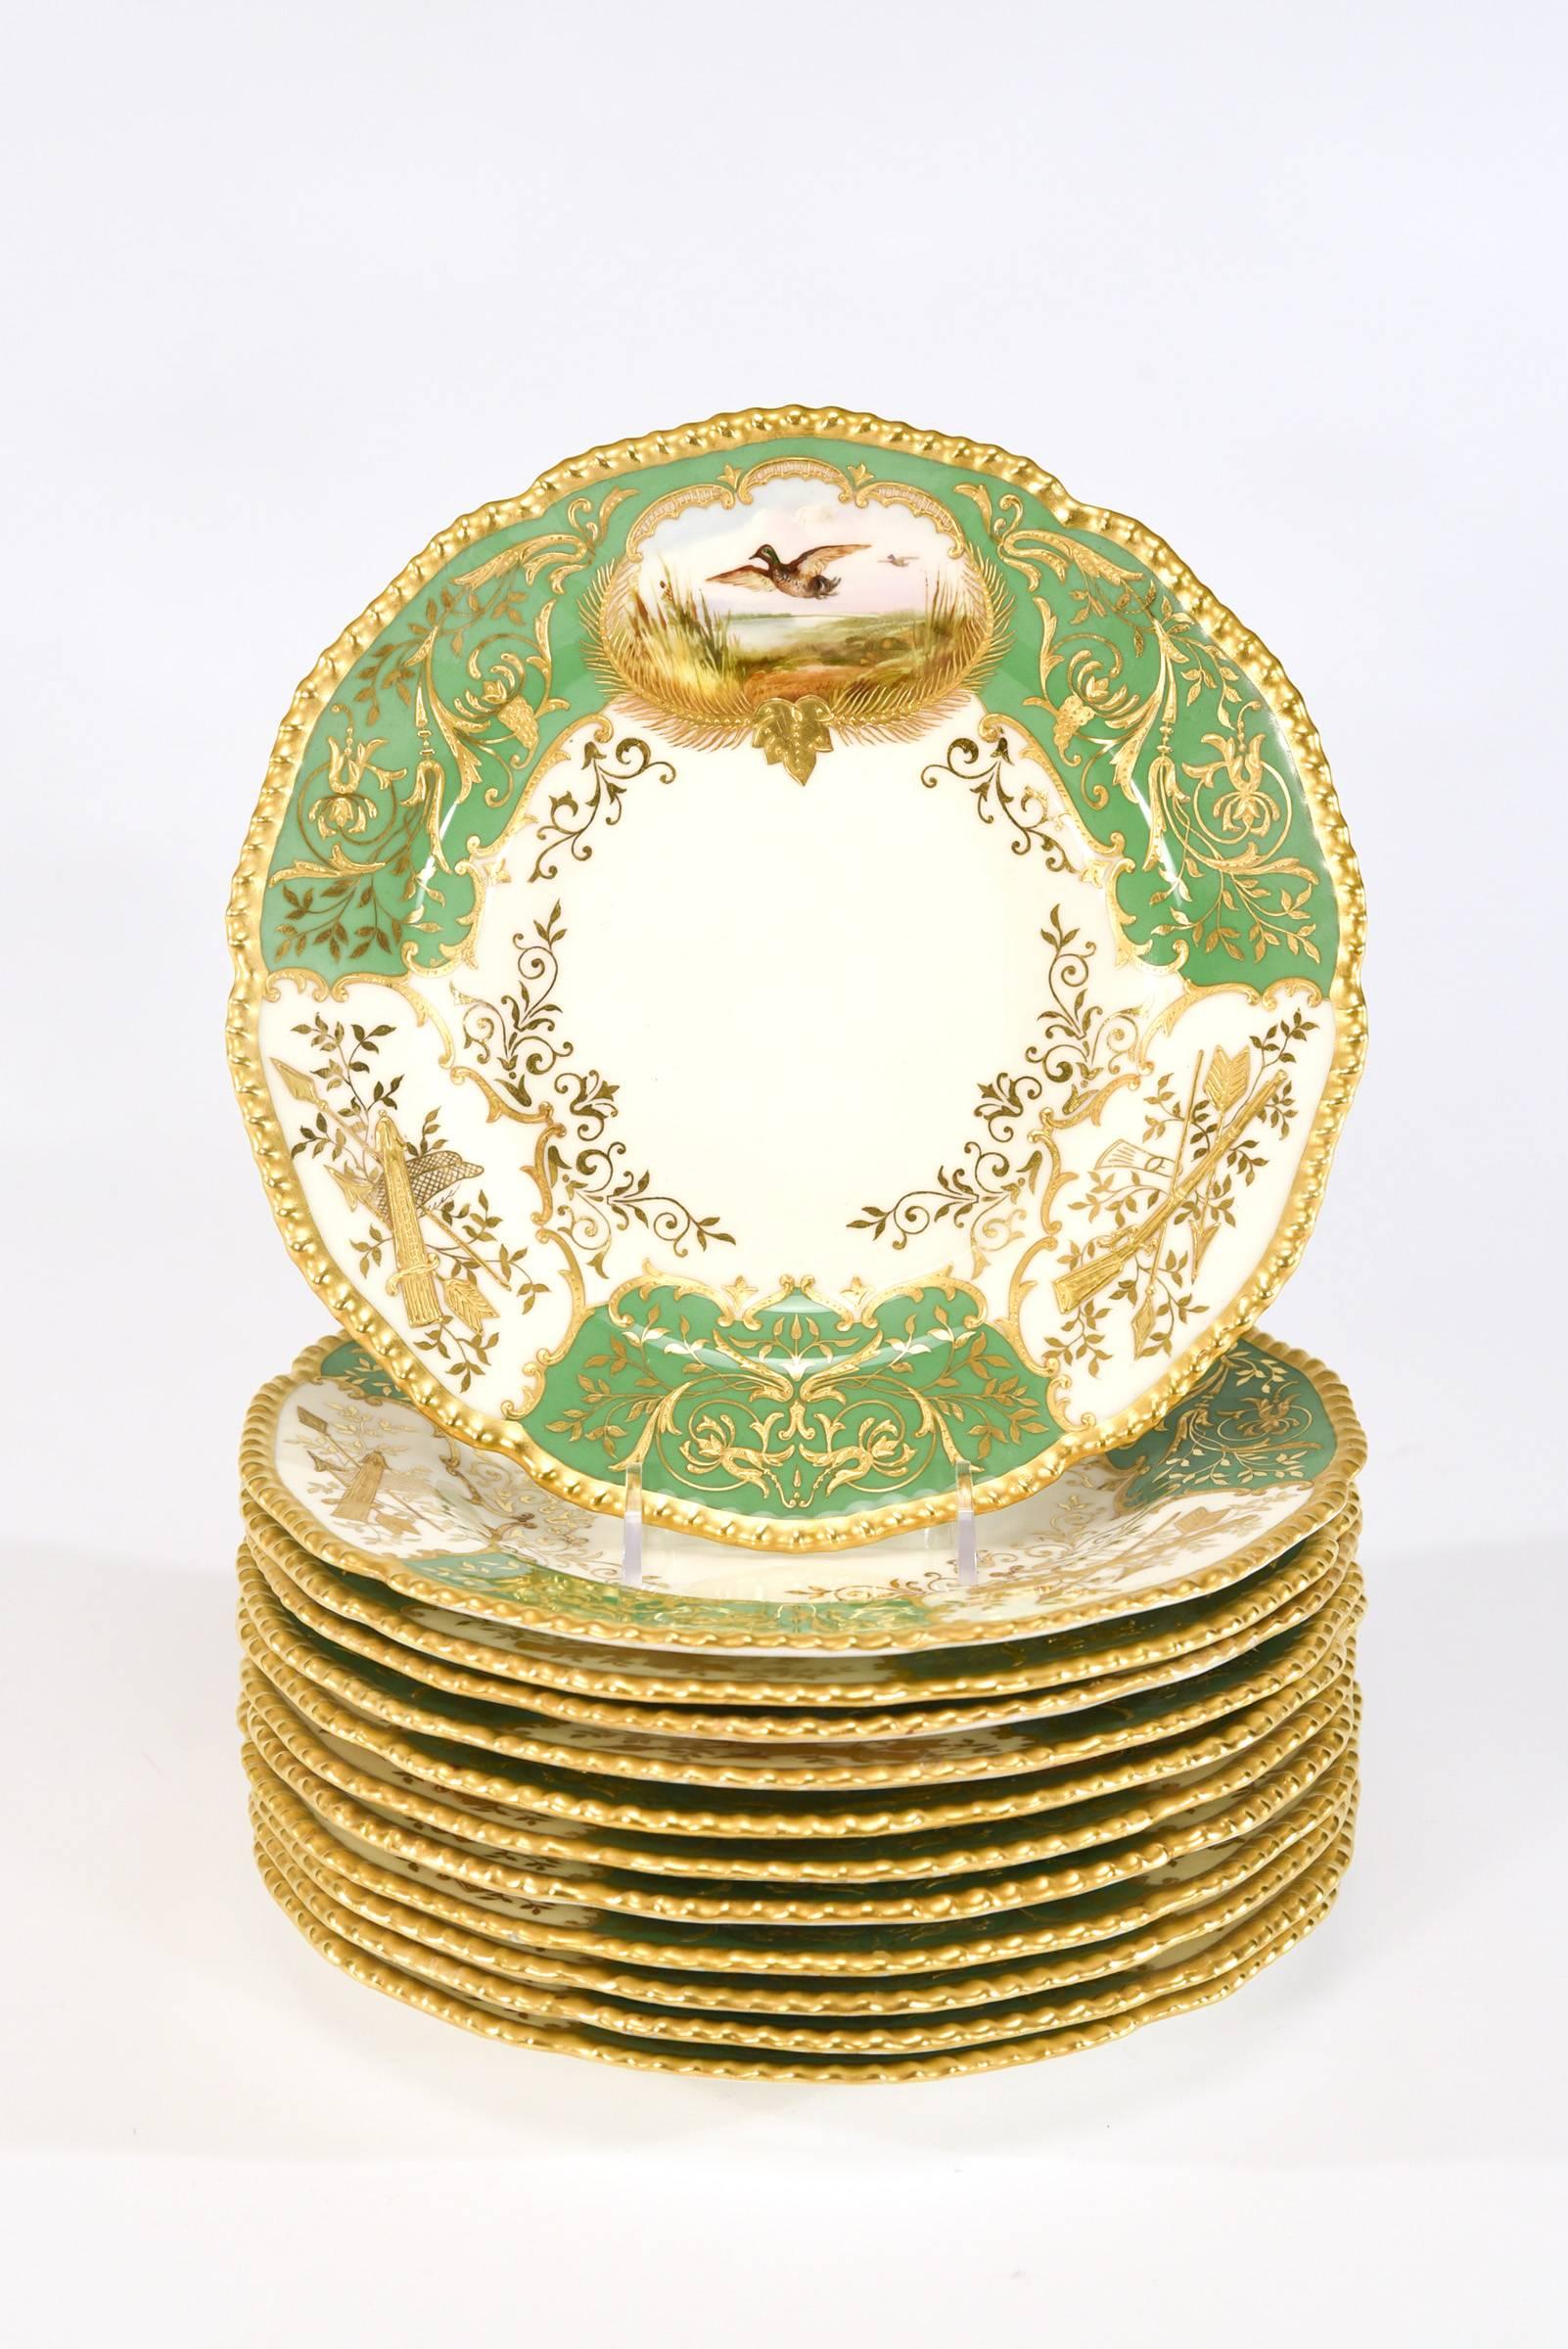 This set of 12 Coalport 19th century dessert plates are the perfect solution to serving and enjoying the quality decoration of hand painted game birds. Each bird is named on the back and the centers are white and ready for presentation. The gadroon